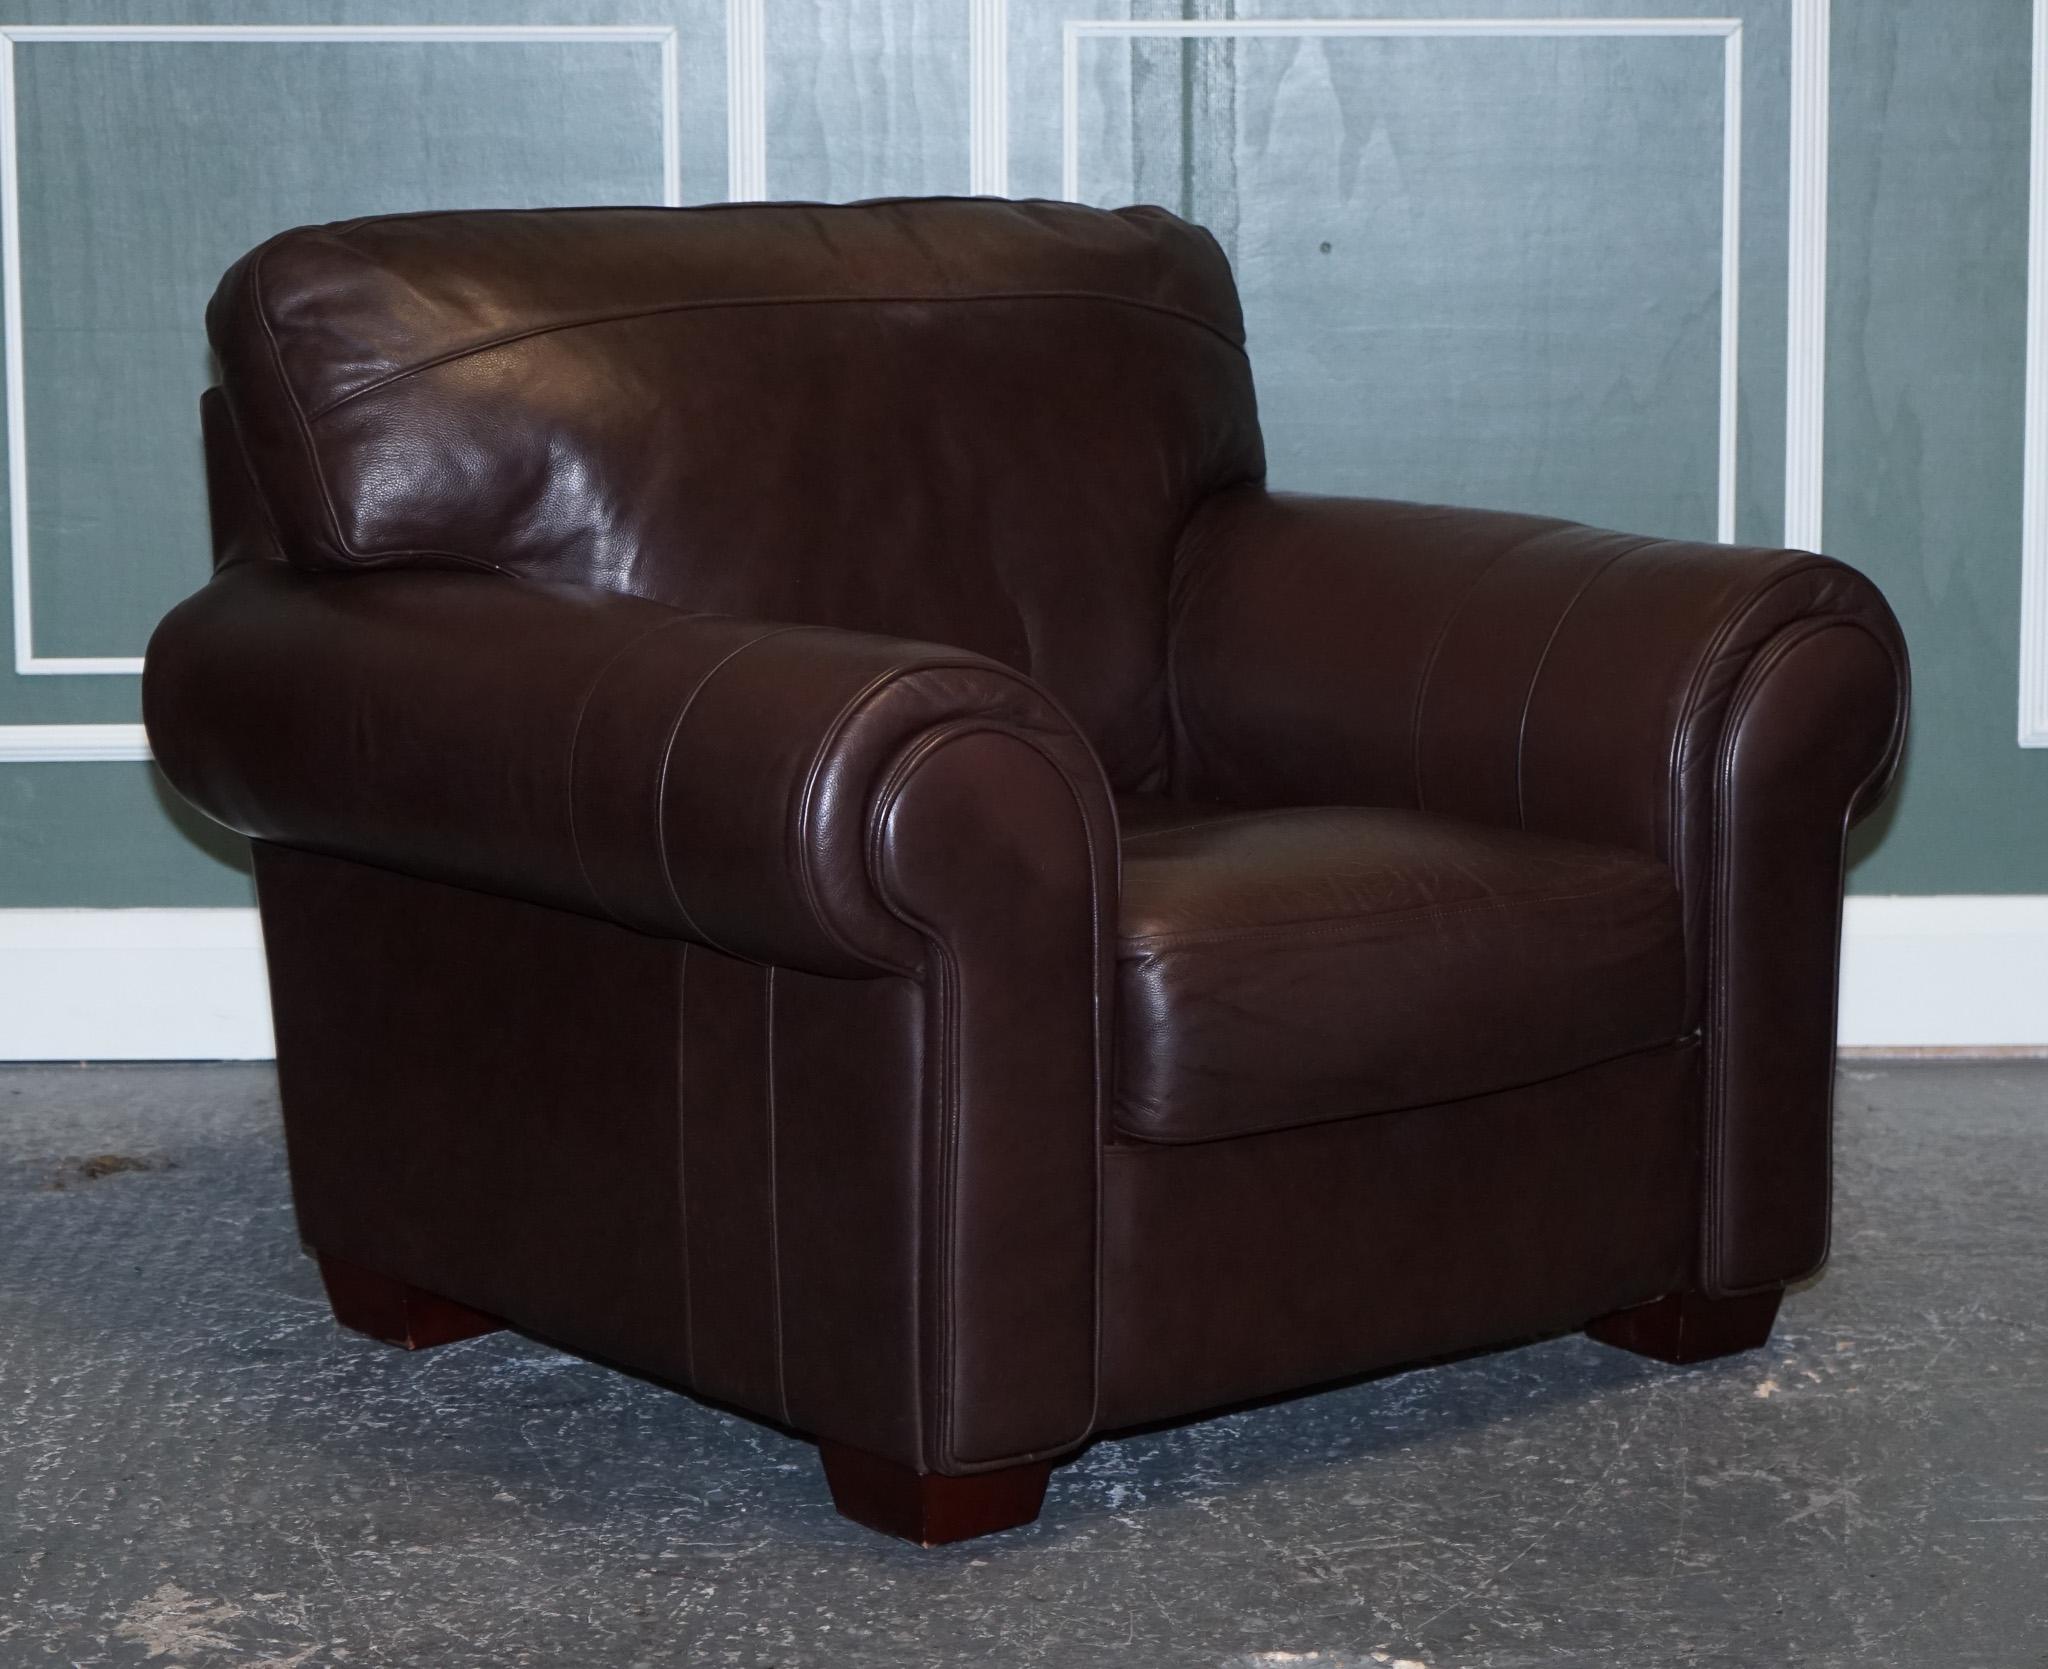 PAIR OF LARGE COMFORTABLE BROWN LEATHER ARMCHAIRS, MATCHiNG SOFA AVAILABLE For Sale 4